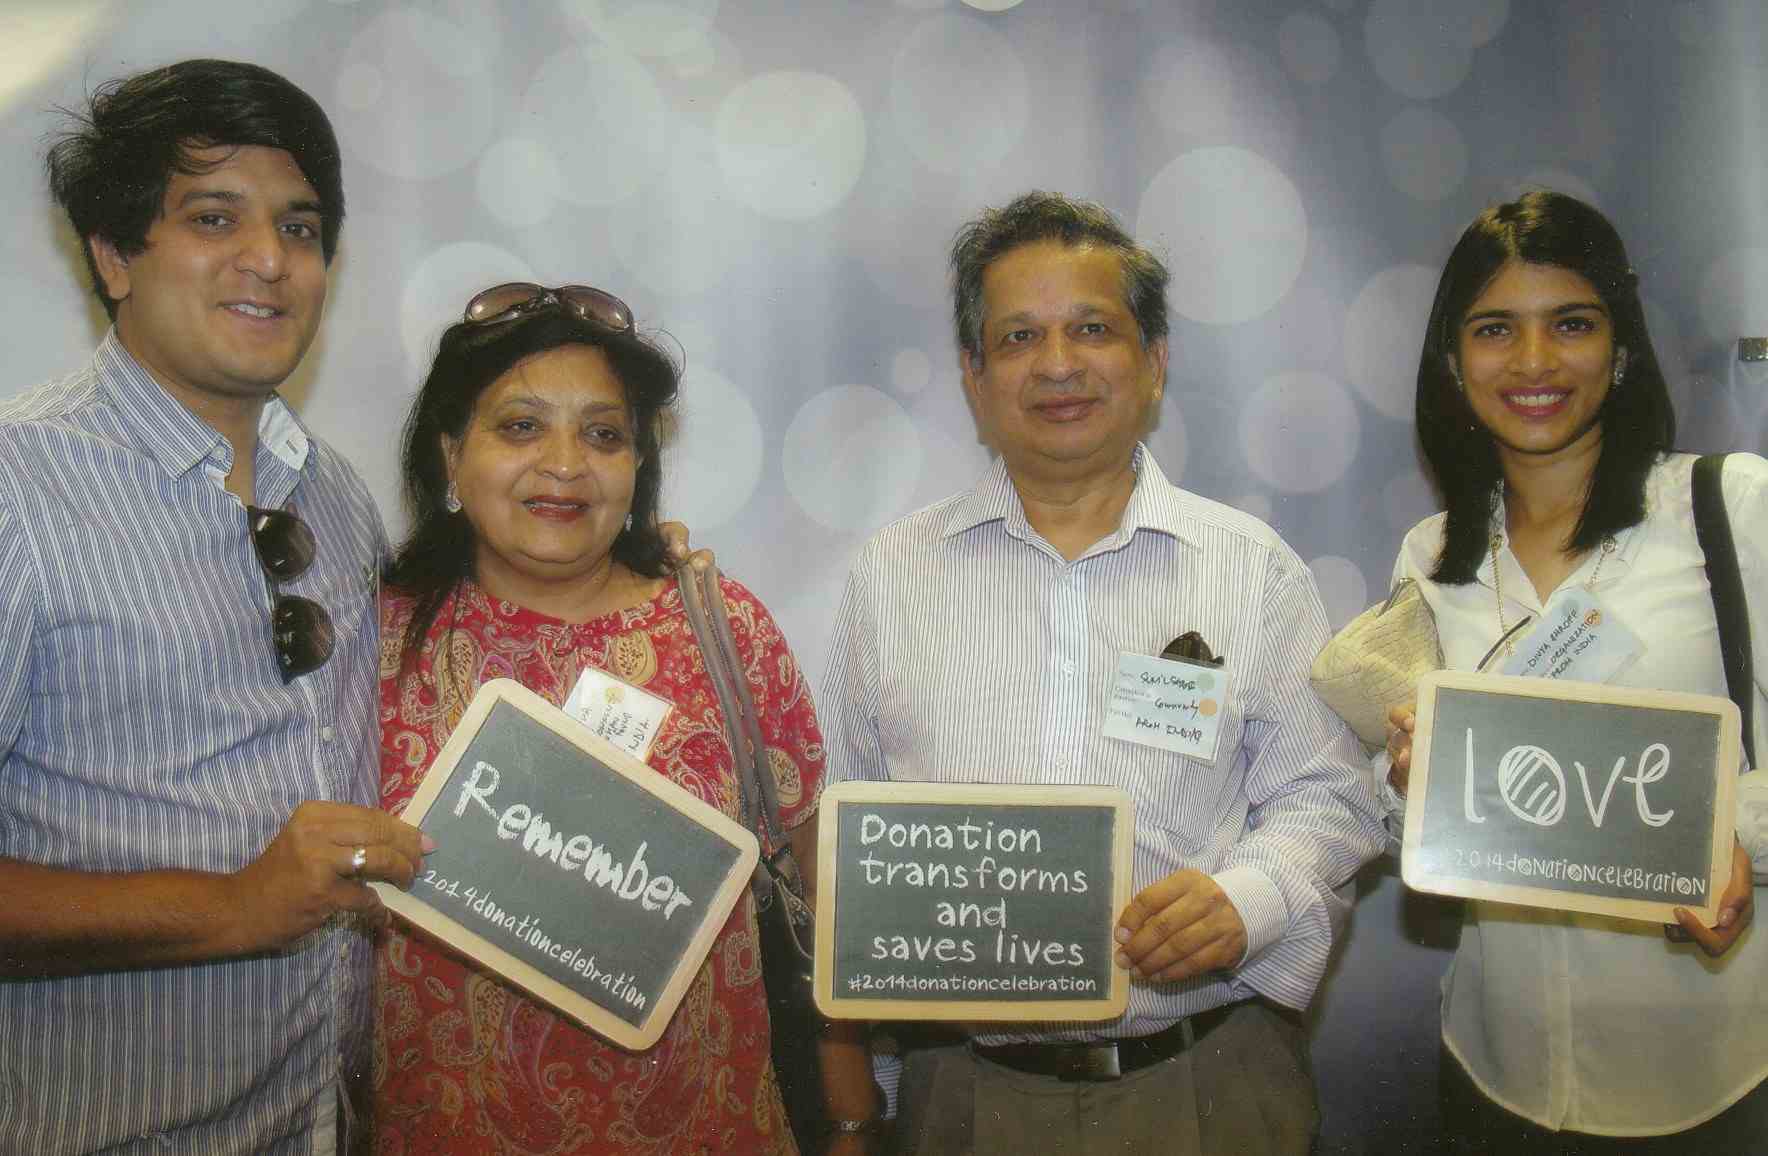 At a function to felicitate organ donor families in Seattle.